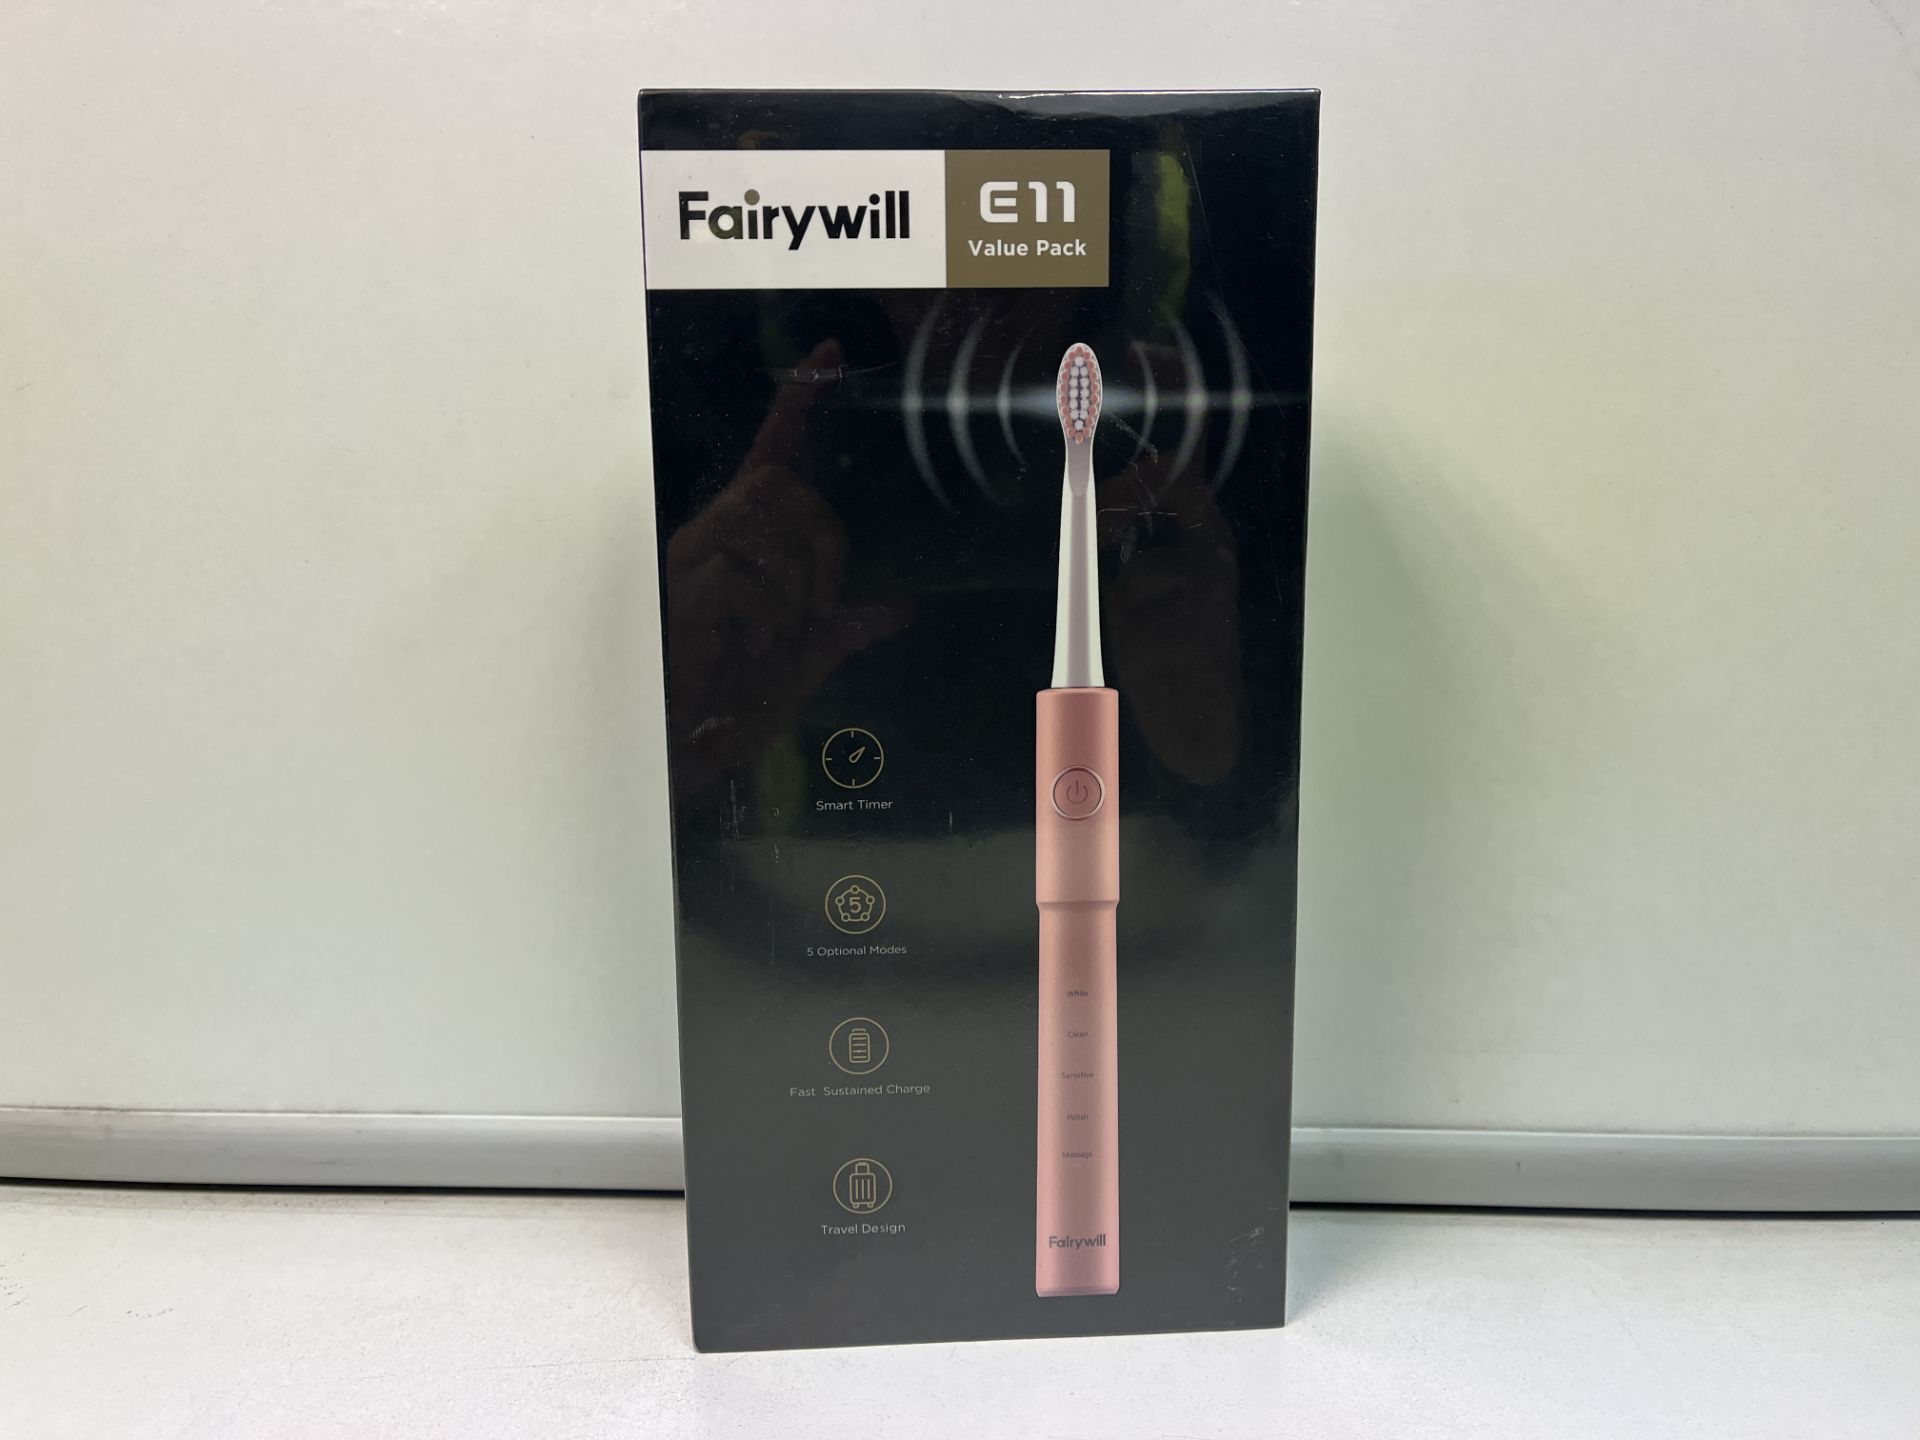 3 x BRAND NEW BOXED FAIRYWELL E11 VALUE PACK ELECTRIC TOOTH BRUSHES. SMART TIMER, 5 OPTIONAL